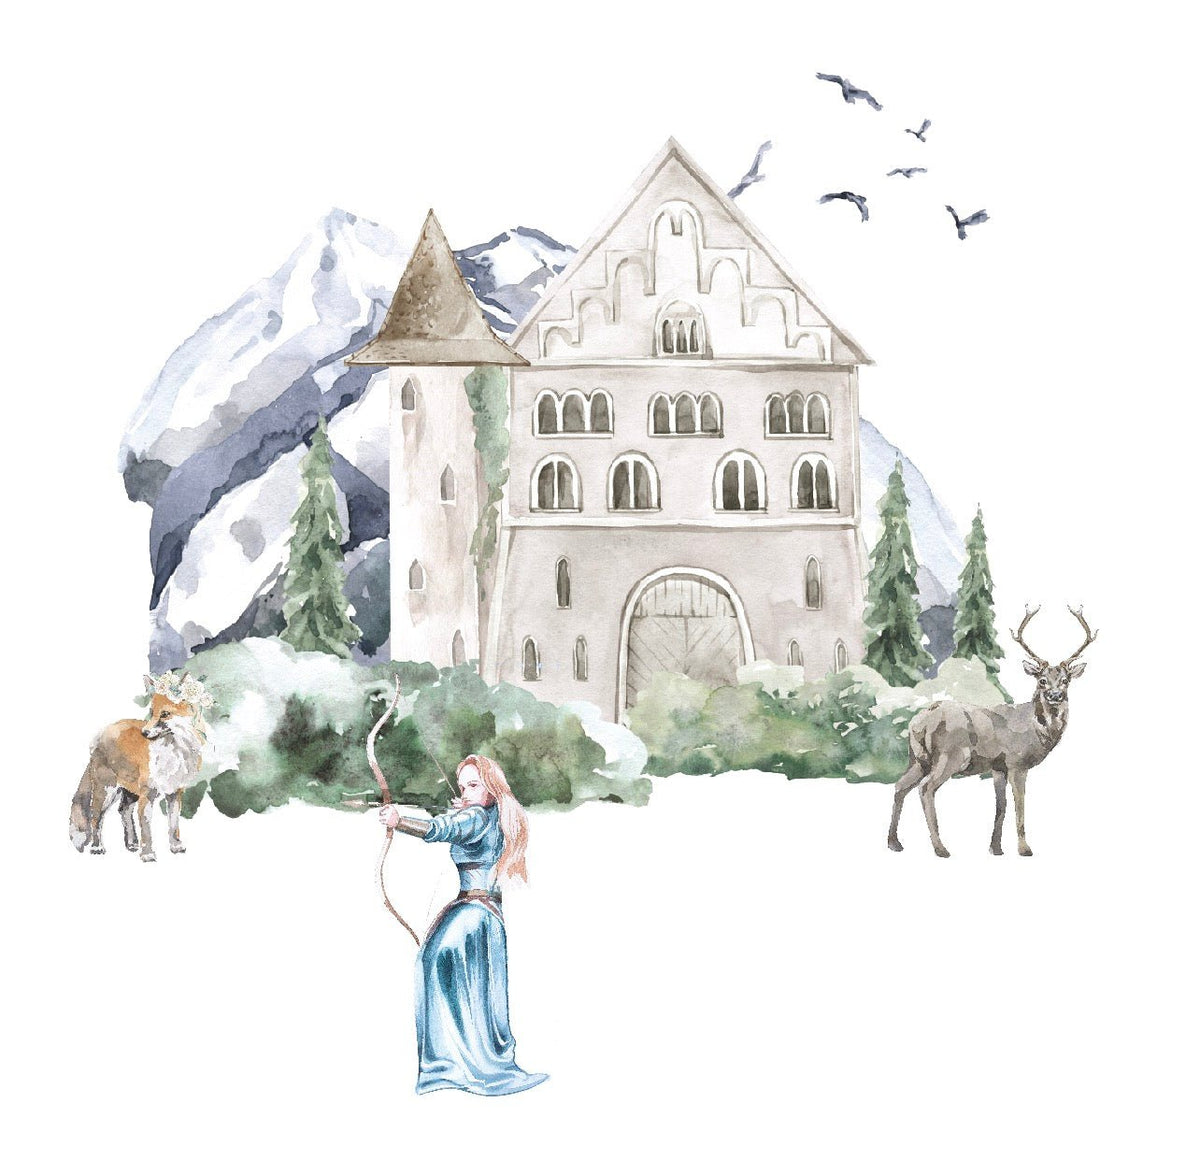 Watercolor illustration of a Fairytale Princess Decals castle in the mountains with a woman in blue clothing holding a bow, surrounded by deer and birds flying overhead.